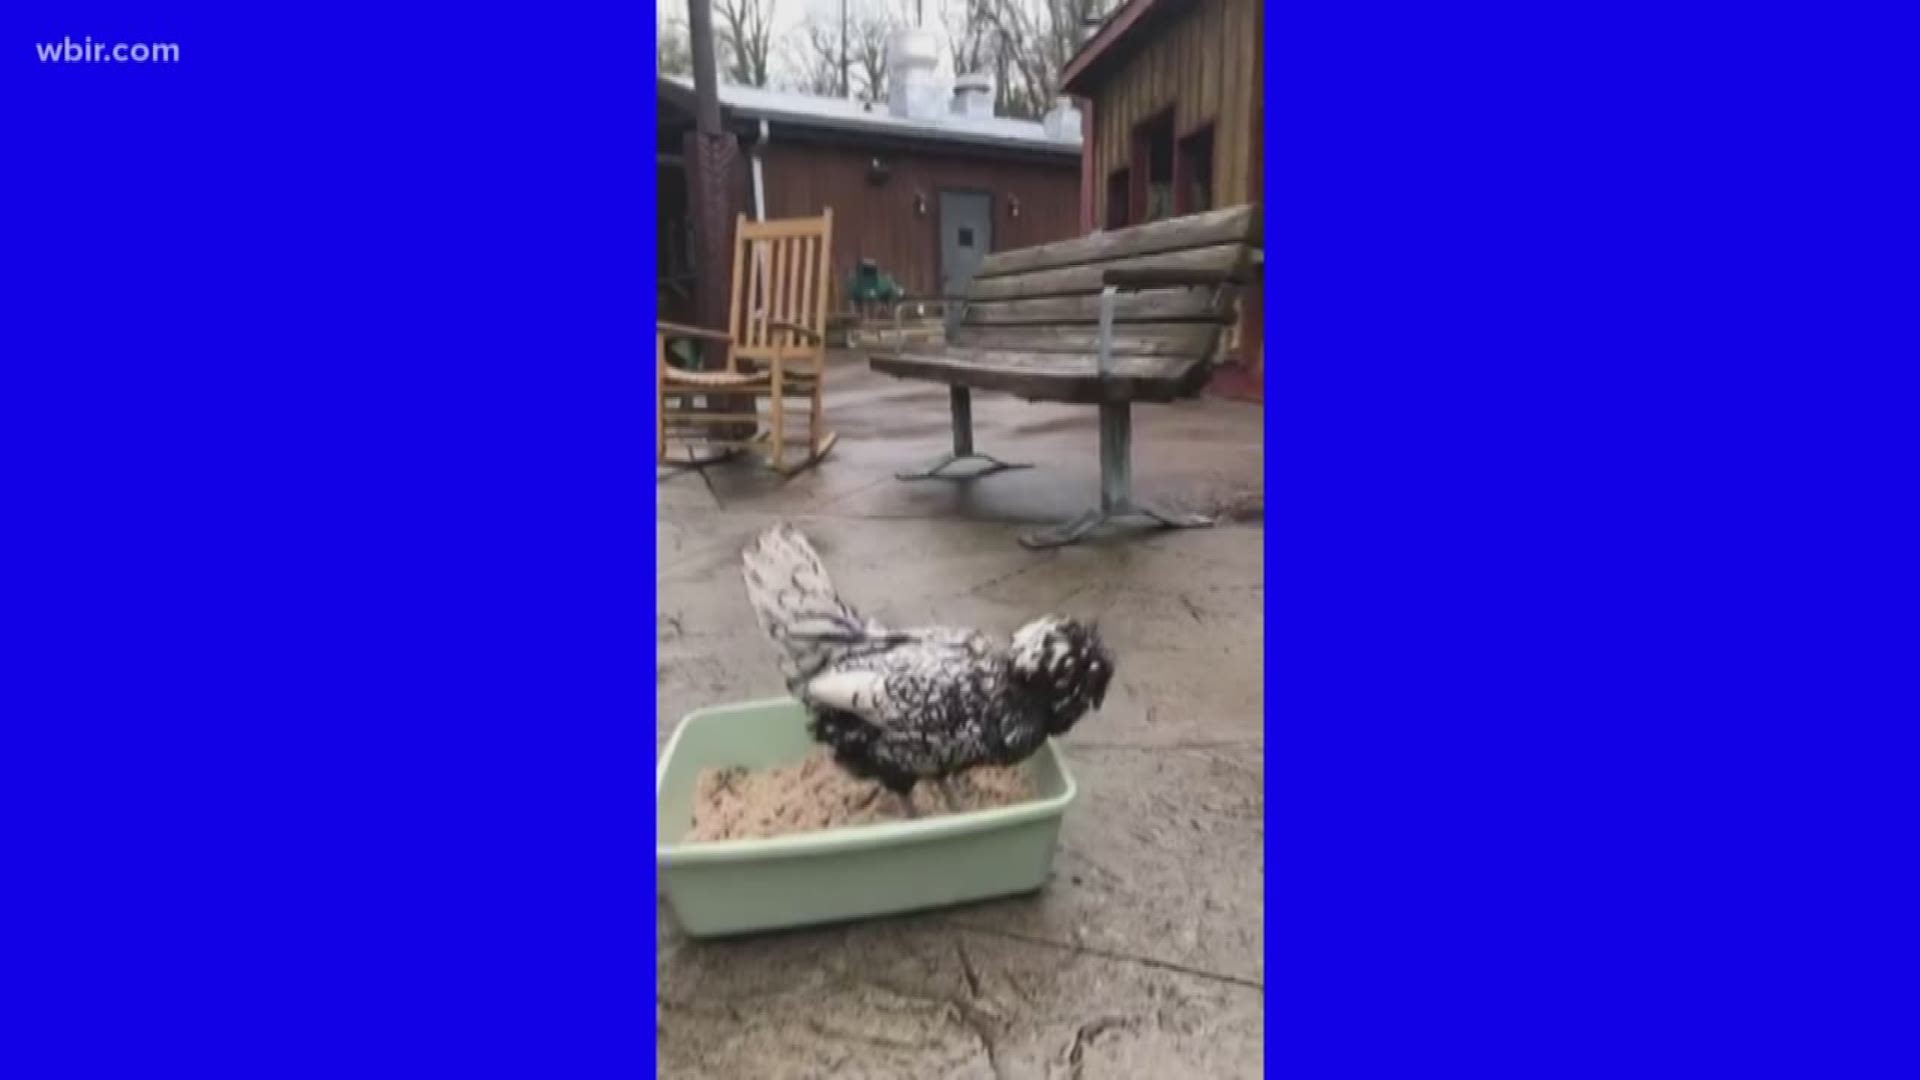 You can watch Zoo Knoxville's 'Bring the Zoo to you' on their Facebook page while they are currently closed zooknoxville.org. March 20, 2020-4pm.